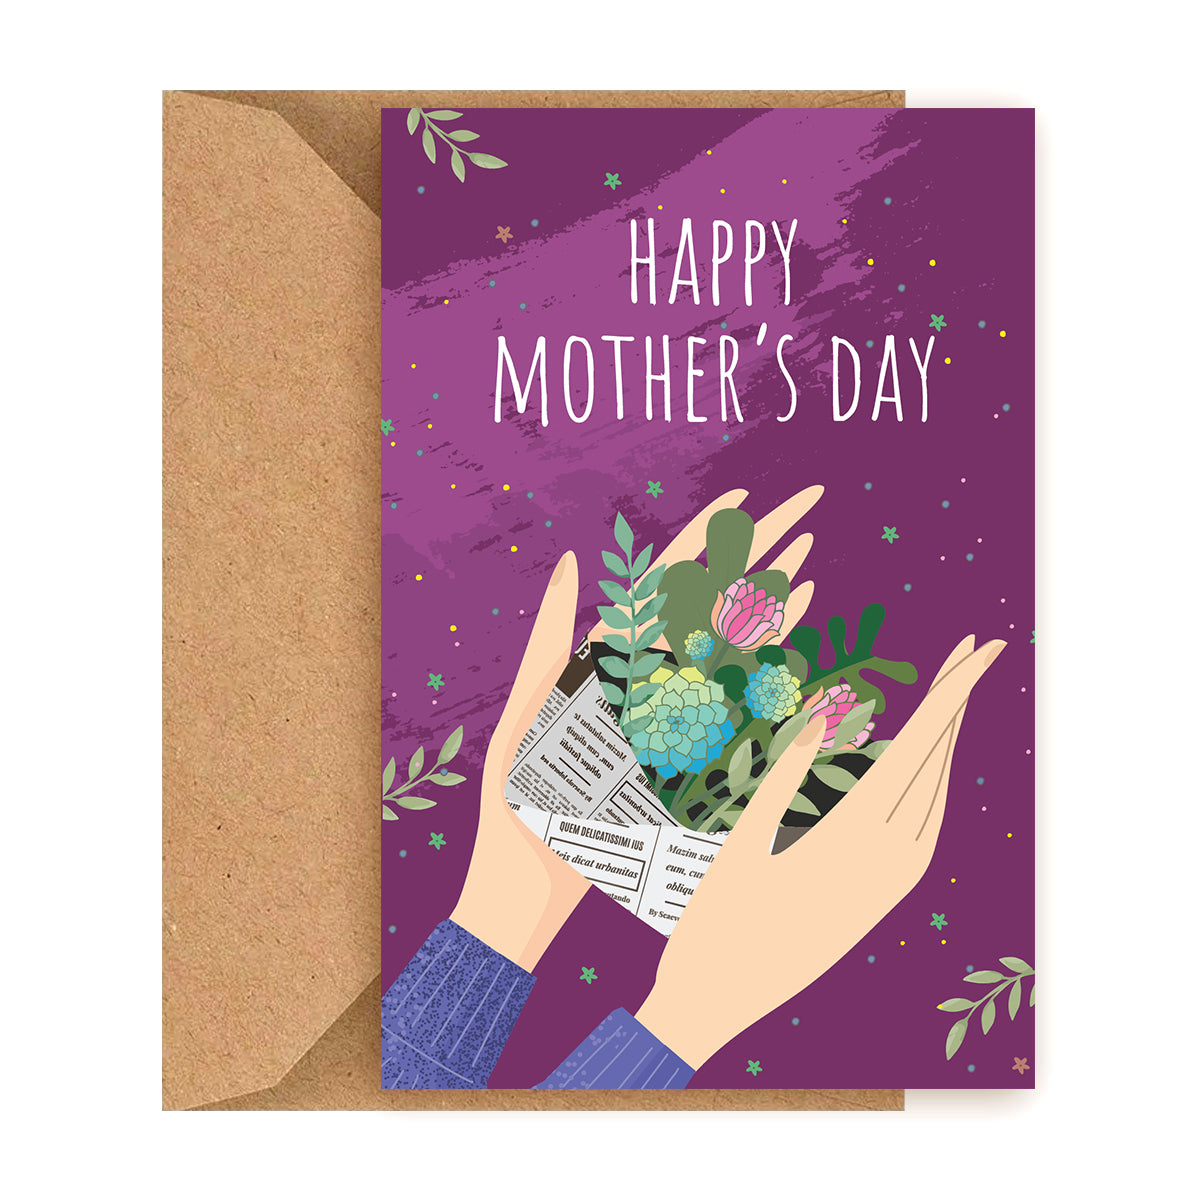 Happy mother's day cards, Mothers day greeting cards, Mother's day succulent card, Mother's day cards 2023, Mother's Day card ideas, Succulent mom card